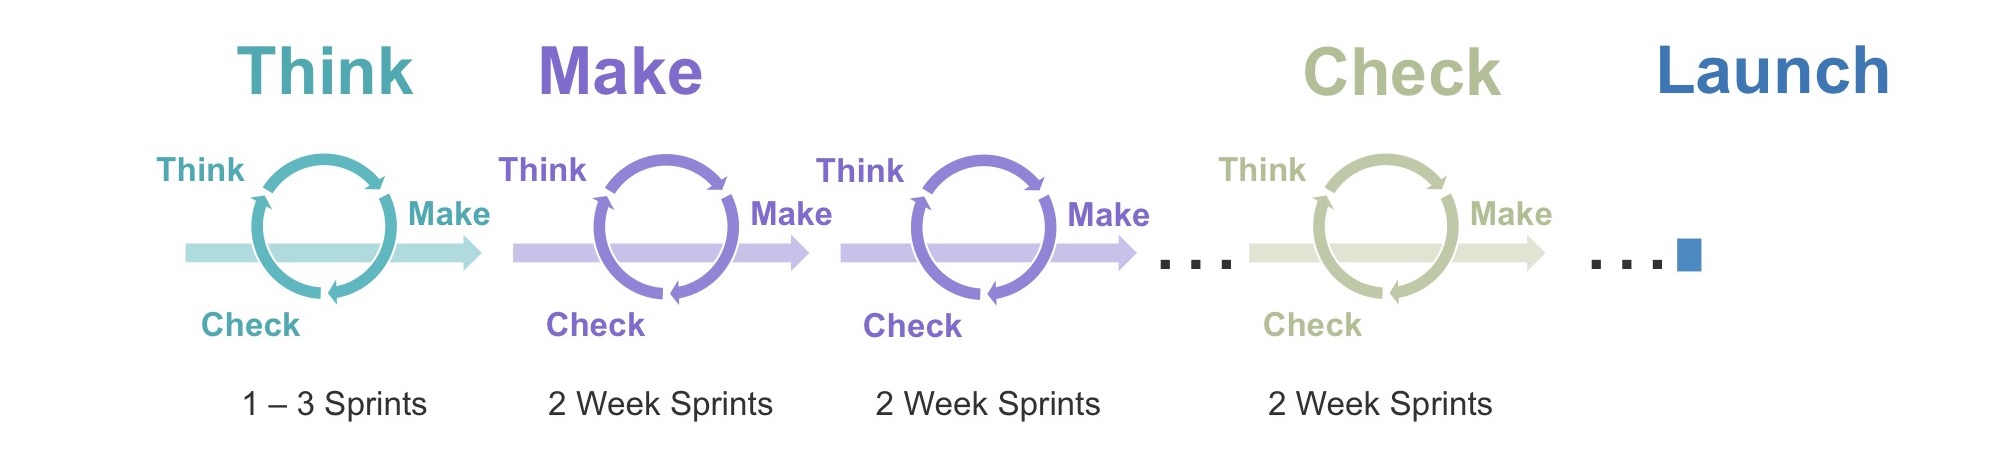 Diagrm with cycles of think, make and check chained together to illustrate the Kinaxis UX process